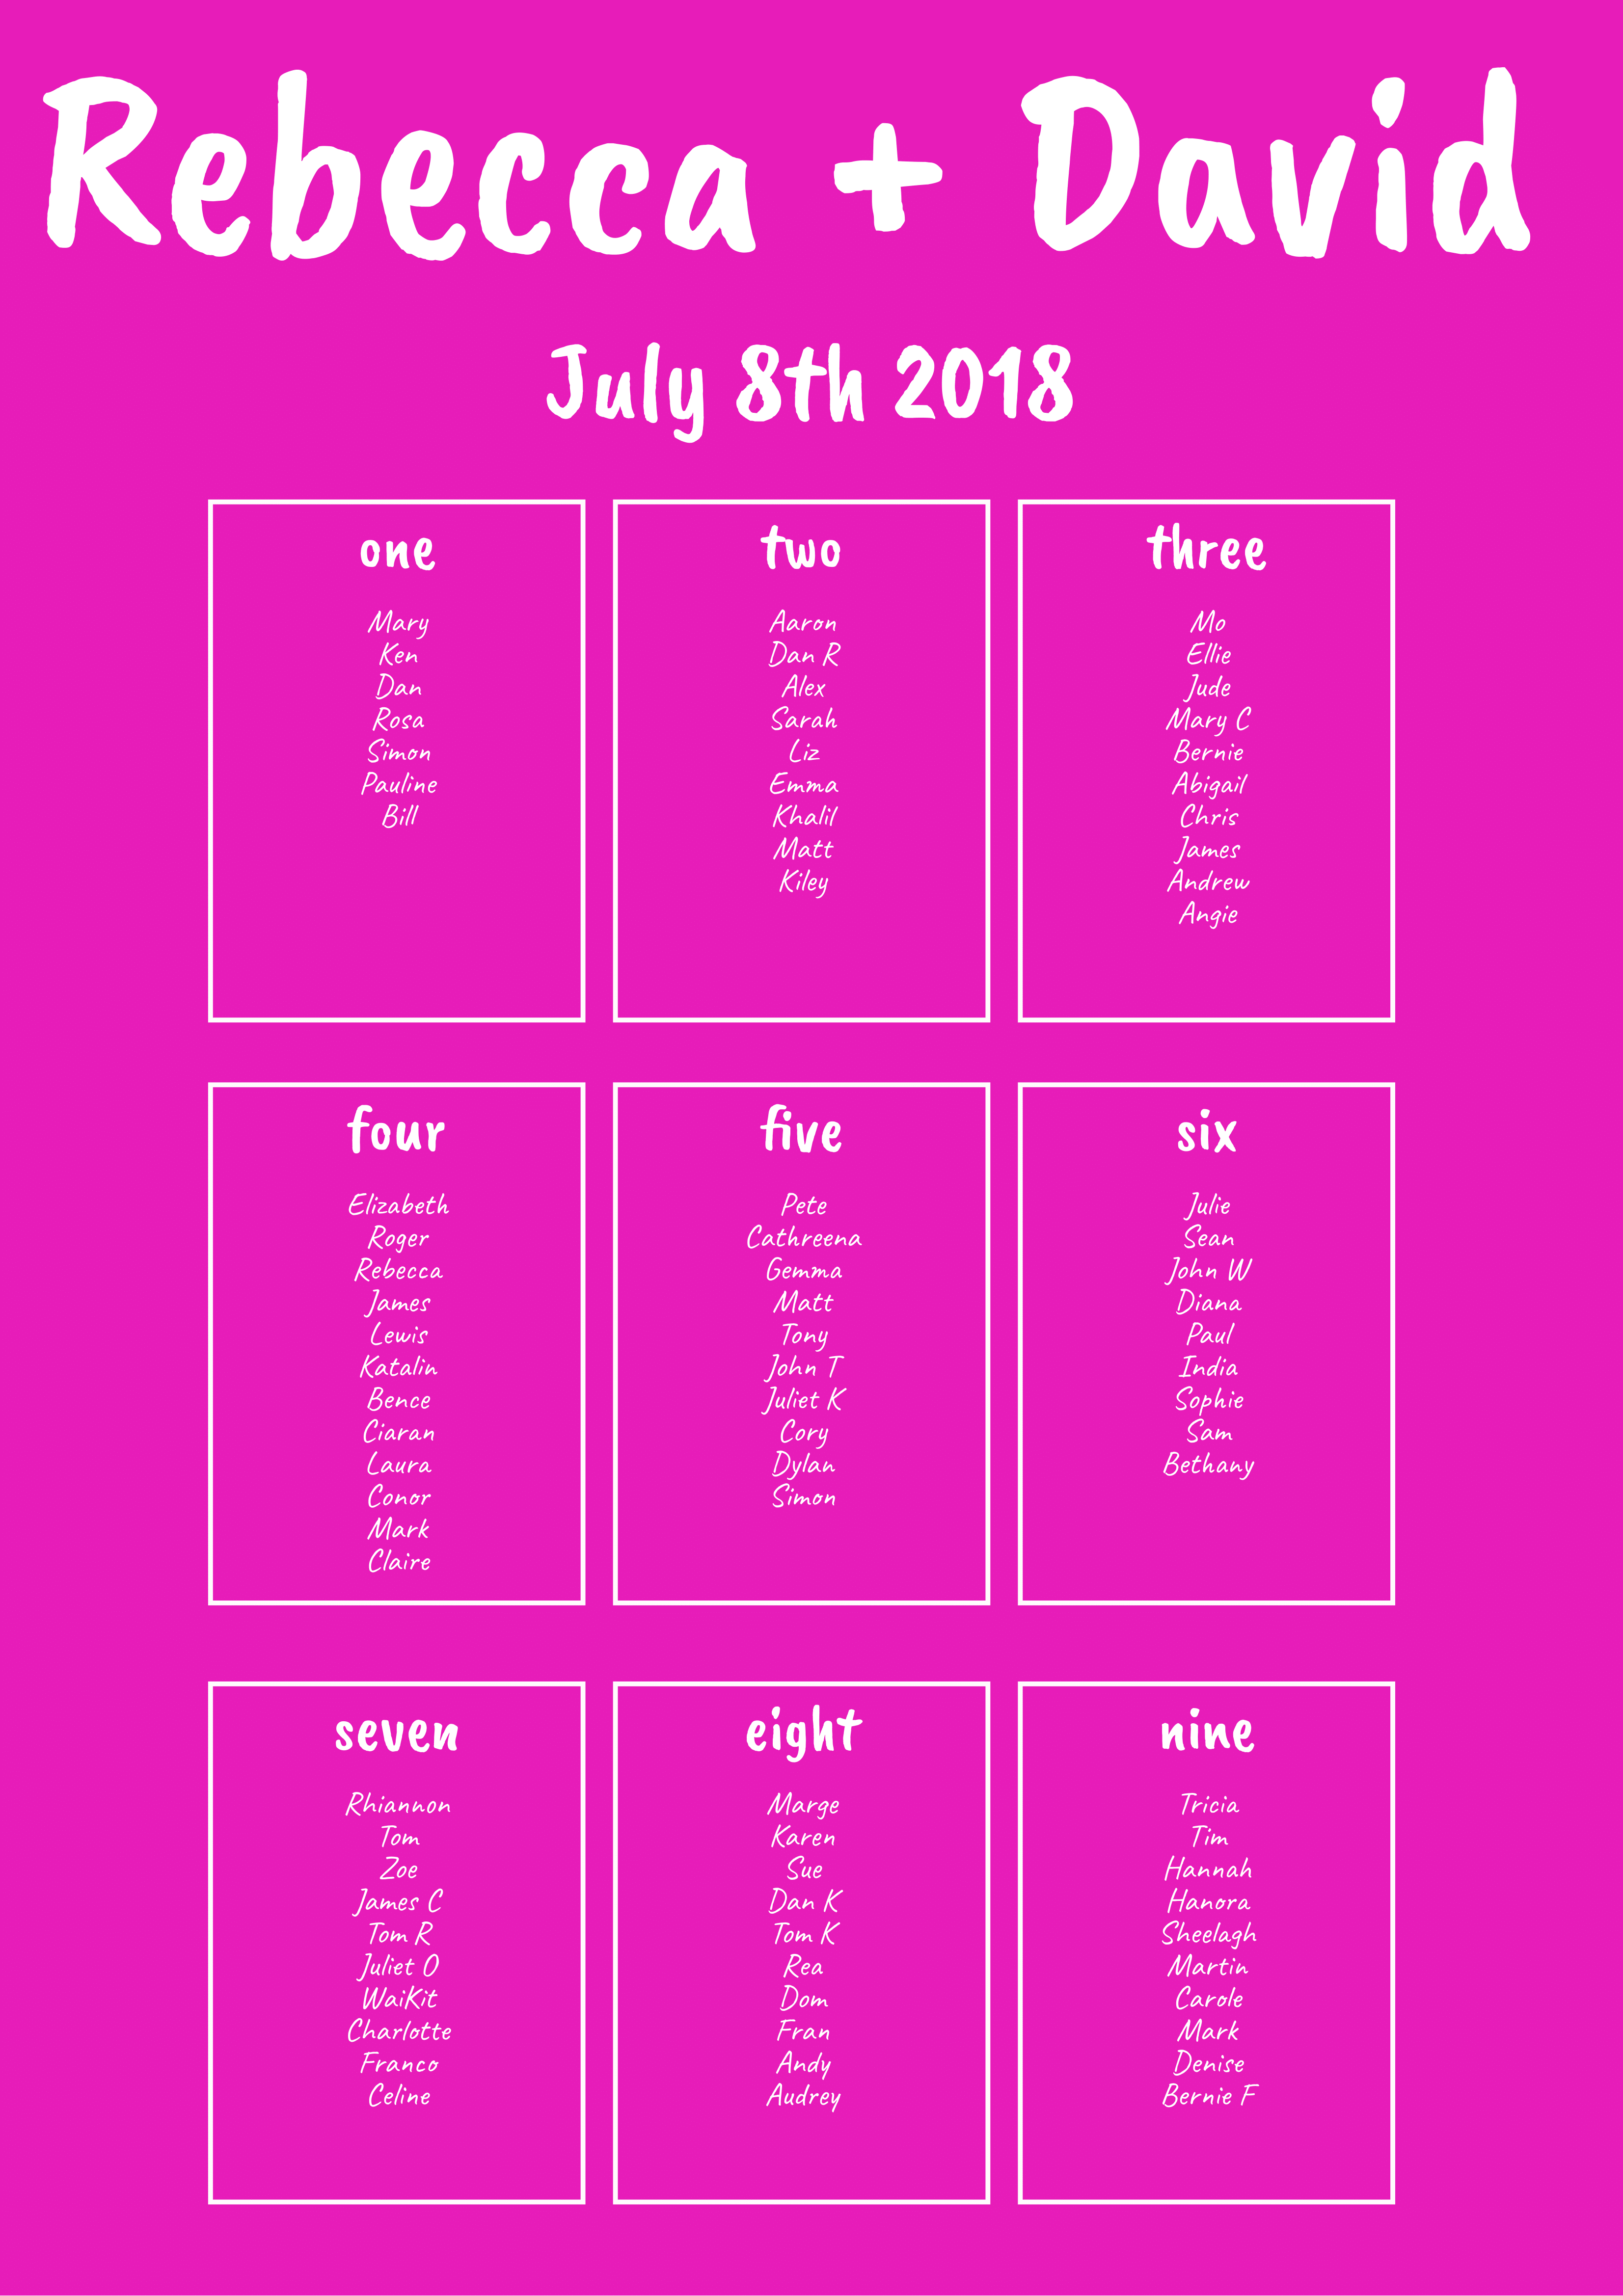 A2 table plan white and pink background